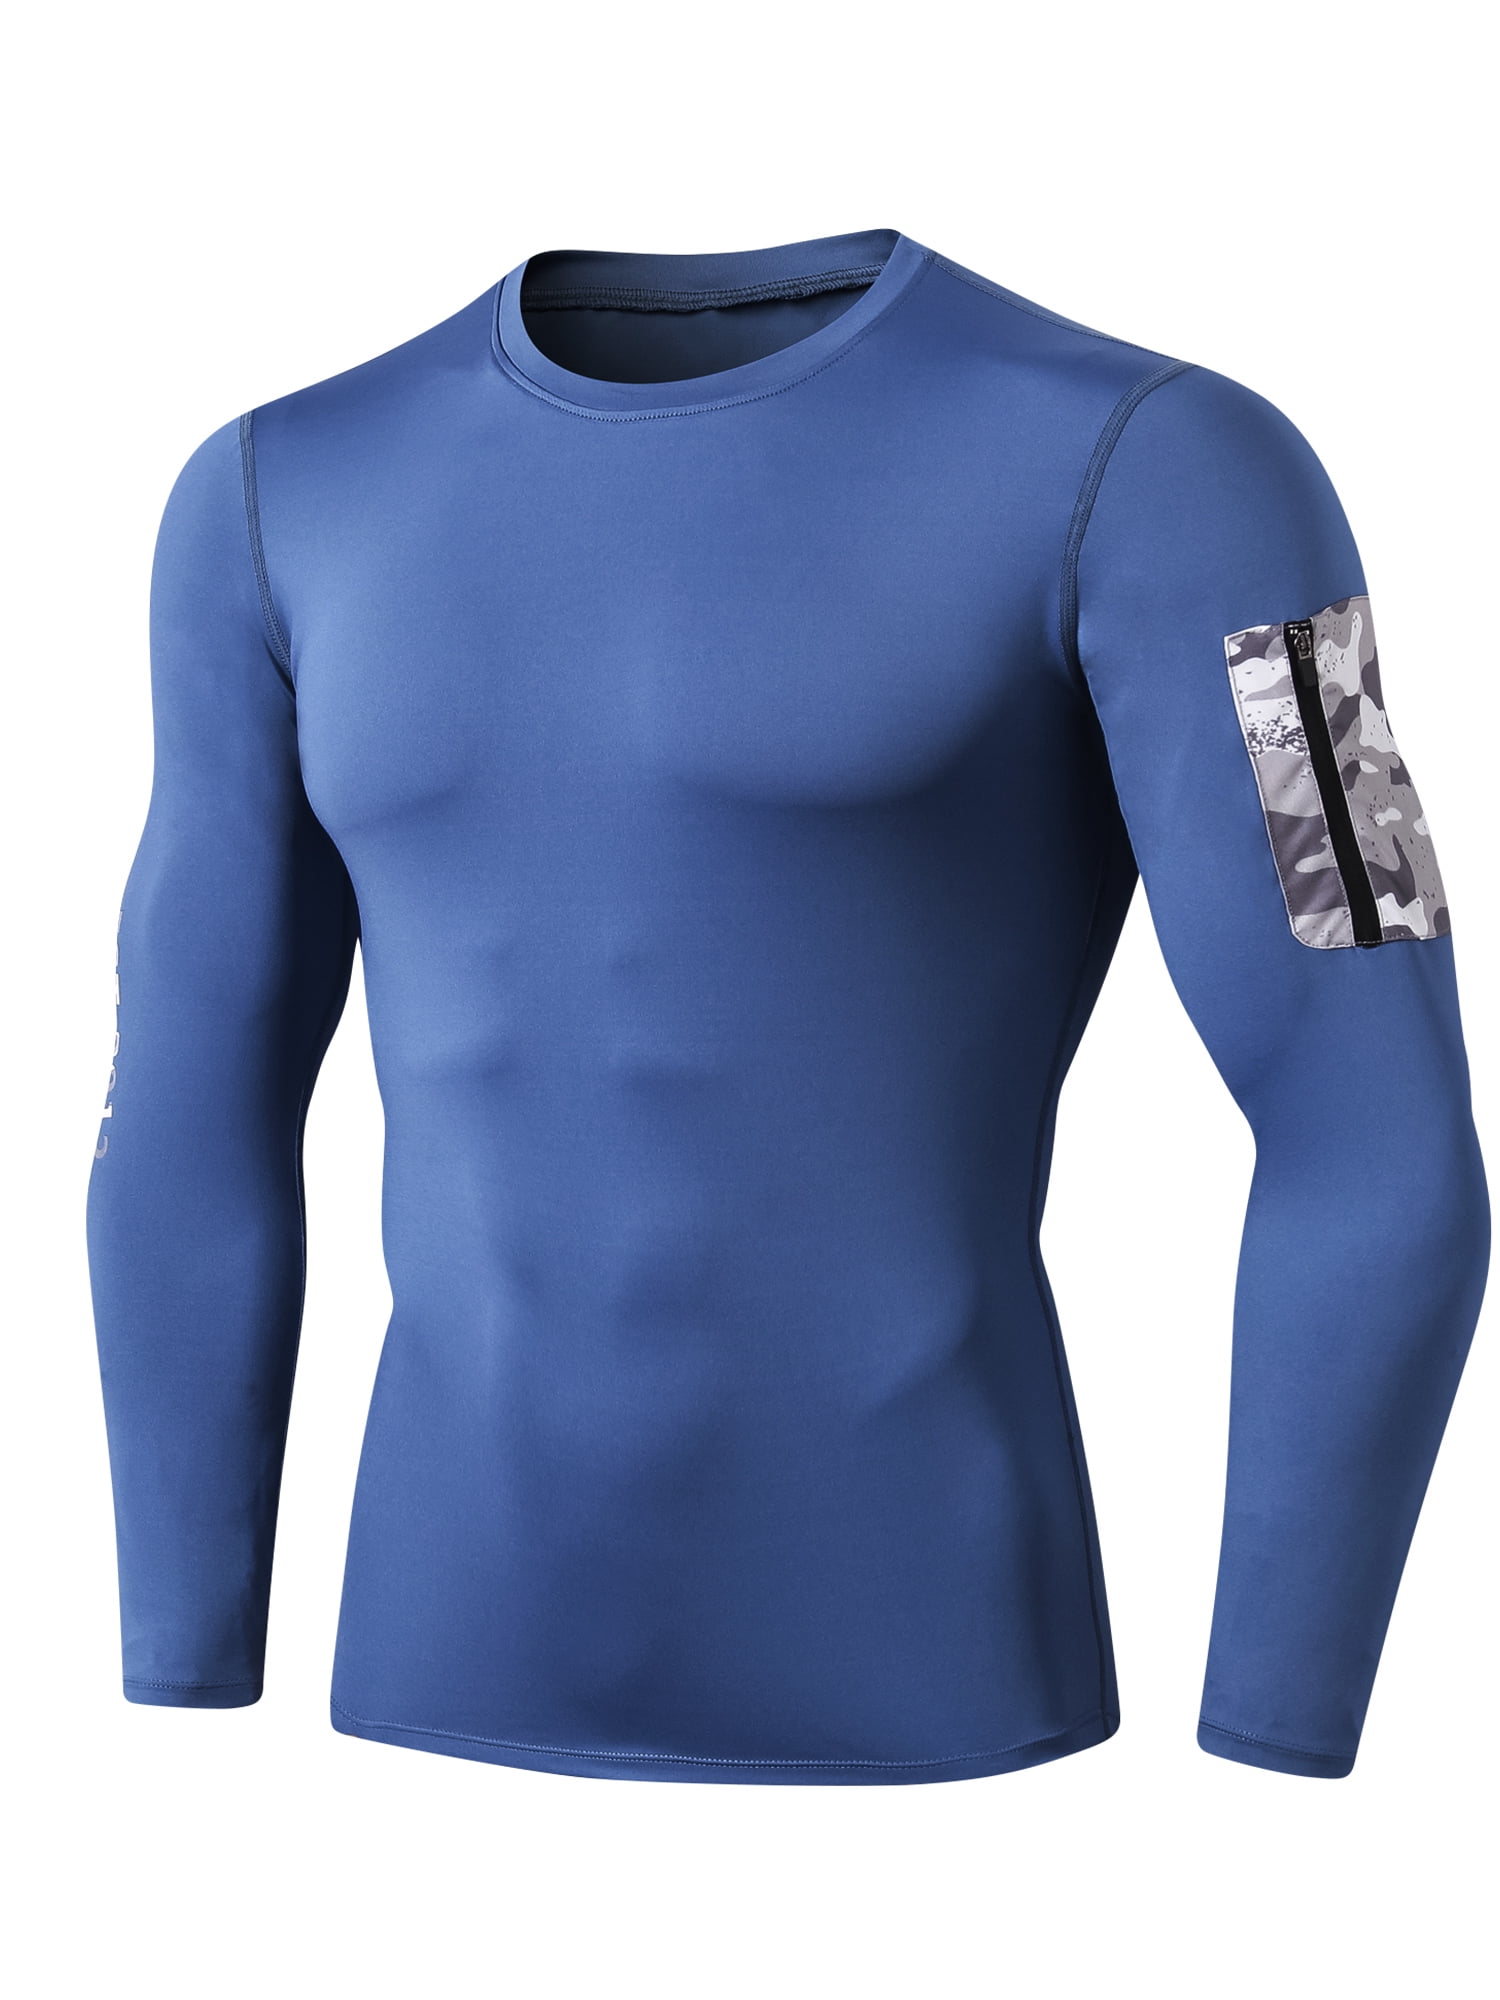 Mens Compression Shirt Running Gym Tops Dri fit Long Sleeve Base Layer Tight fit 